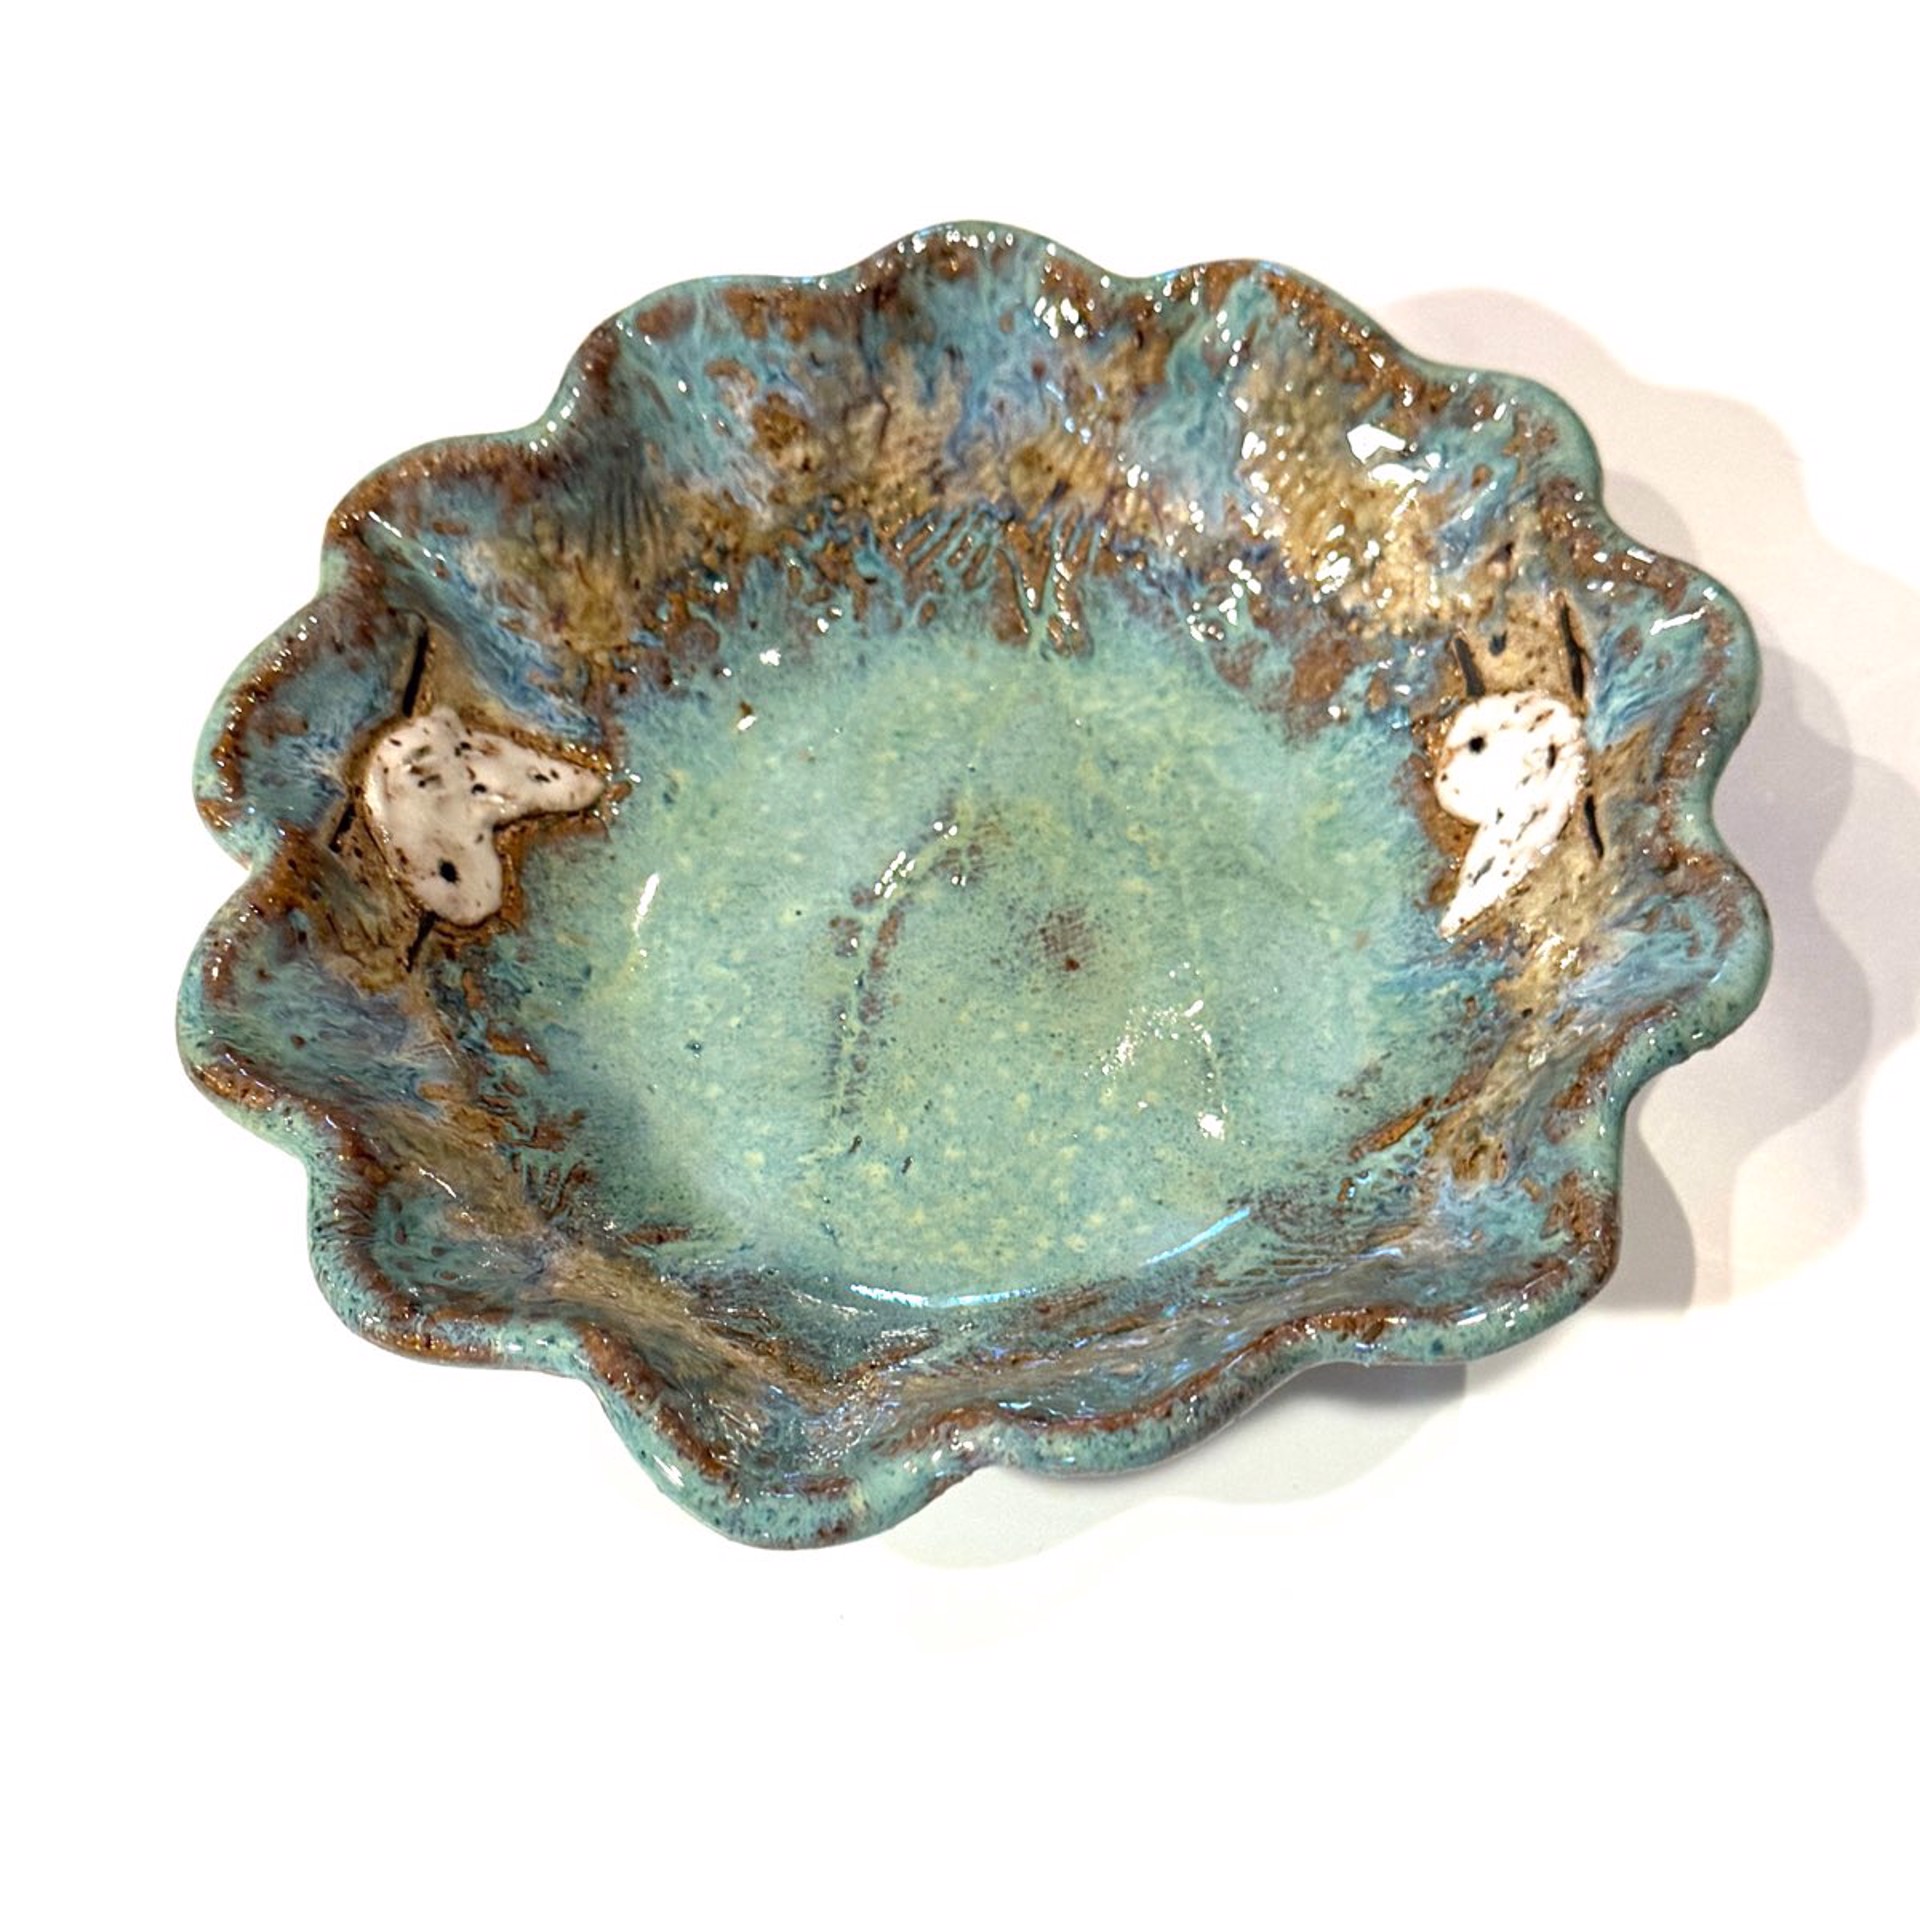 Round Scalloped Bowl with Two Sandpiper (Green Glaze) LG23-1189 by Jim & Steffi Logan